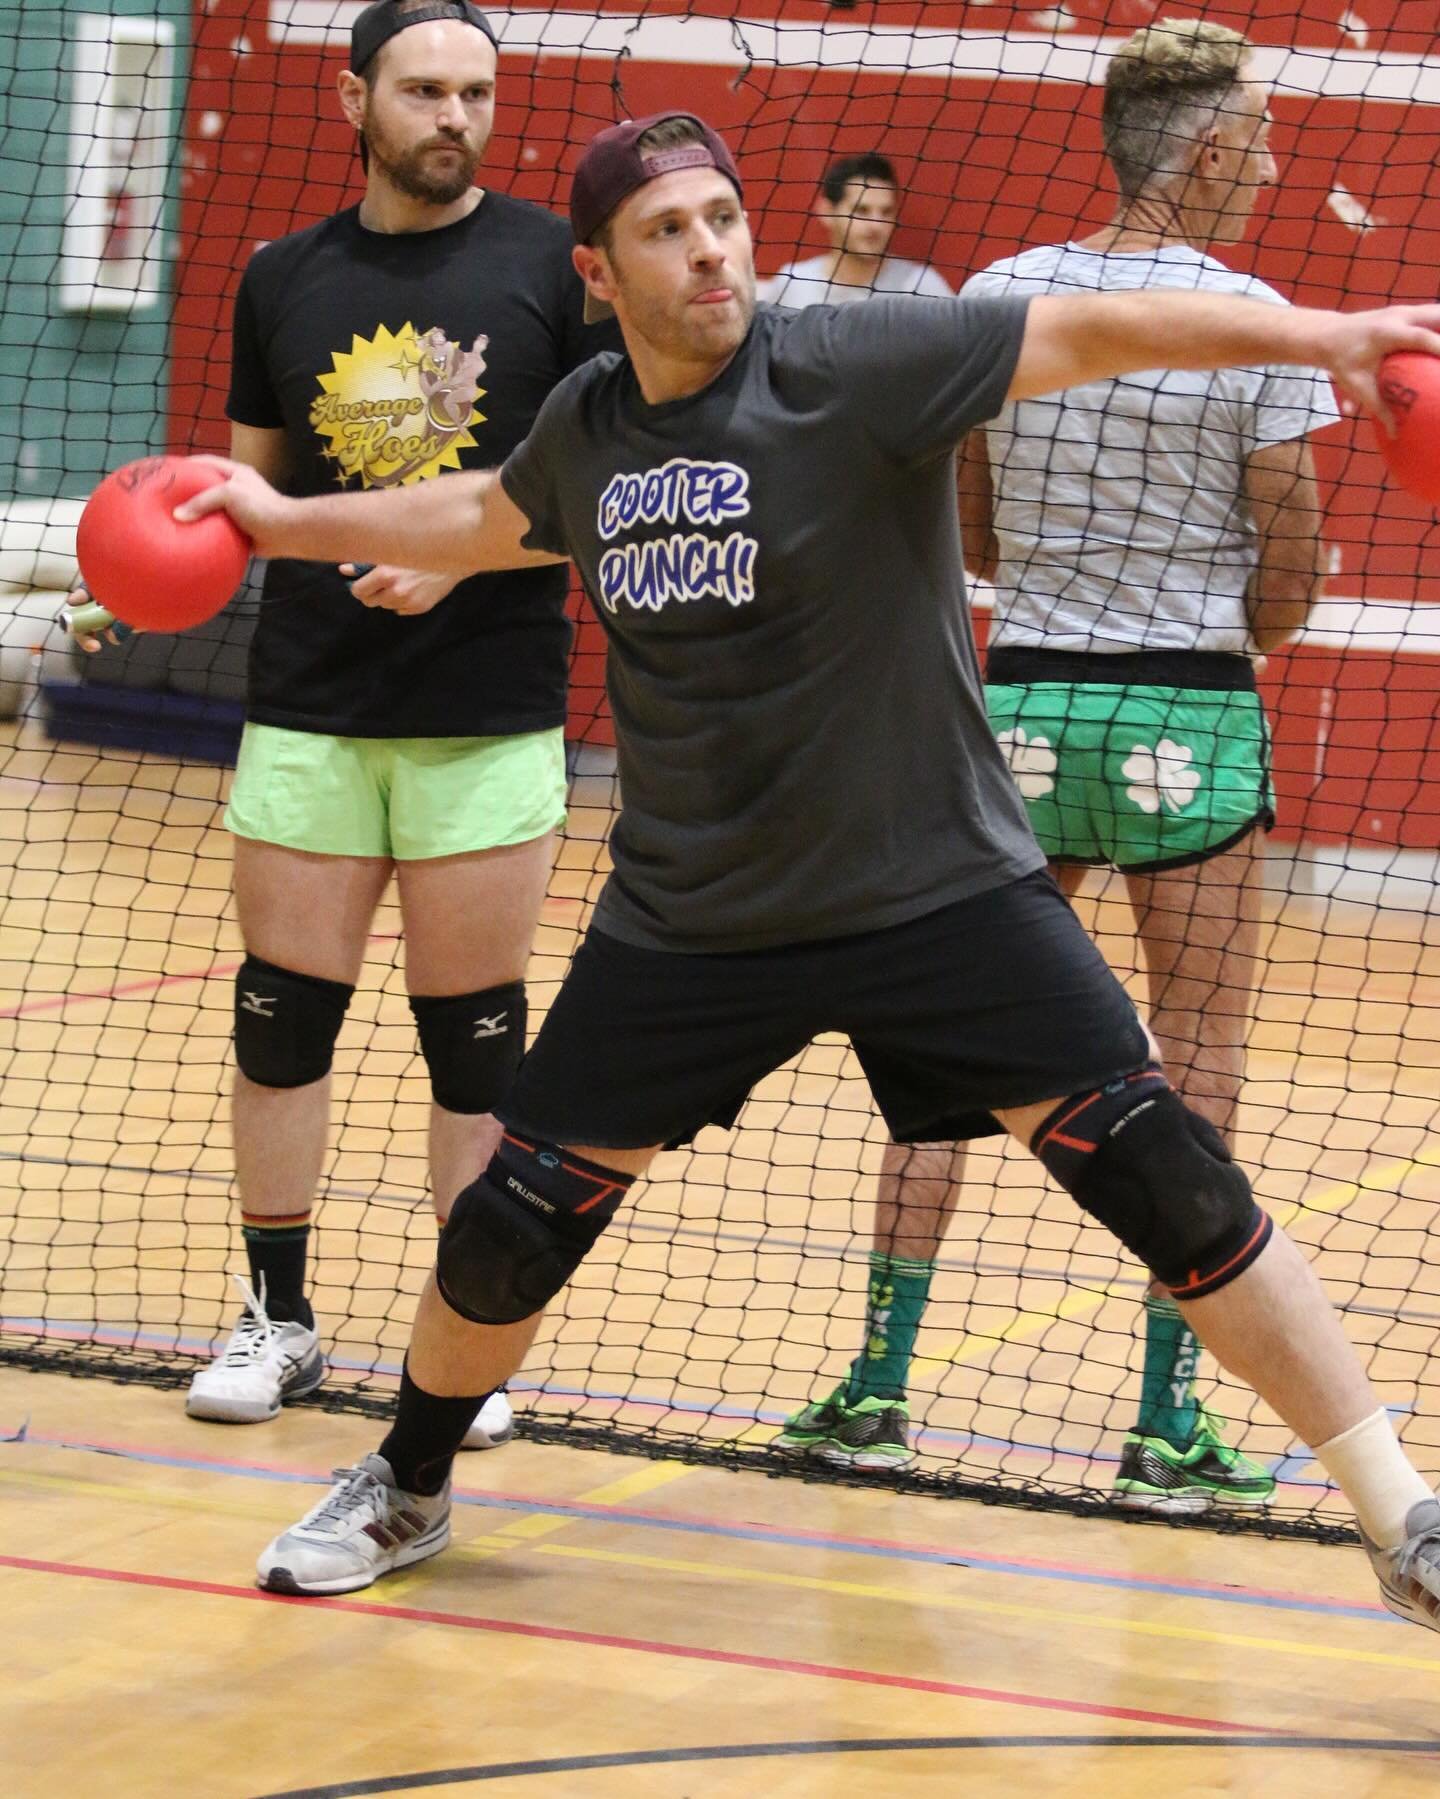 Get into OutLoud LA Dodgeball! Every Wednesday! $65 early bird for 8 weeks, 50 minute games, Essentia water at each game &amp; multiple champions! + Free Shirts!! Register now at https://outloudlosangeles.leagueapps.com/leagues -